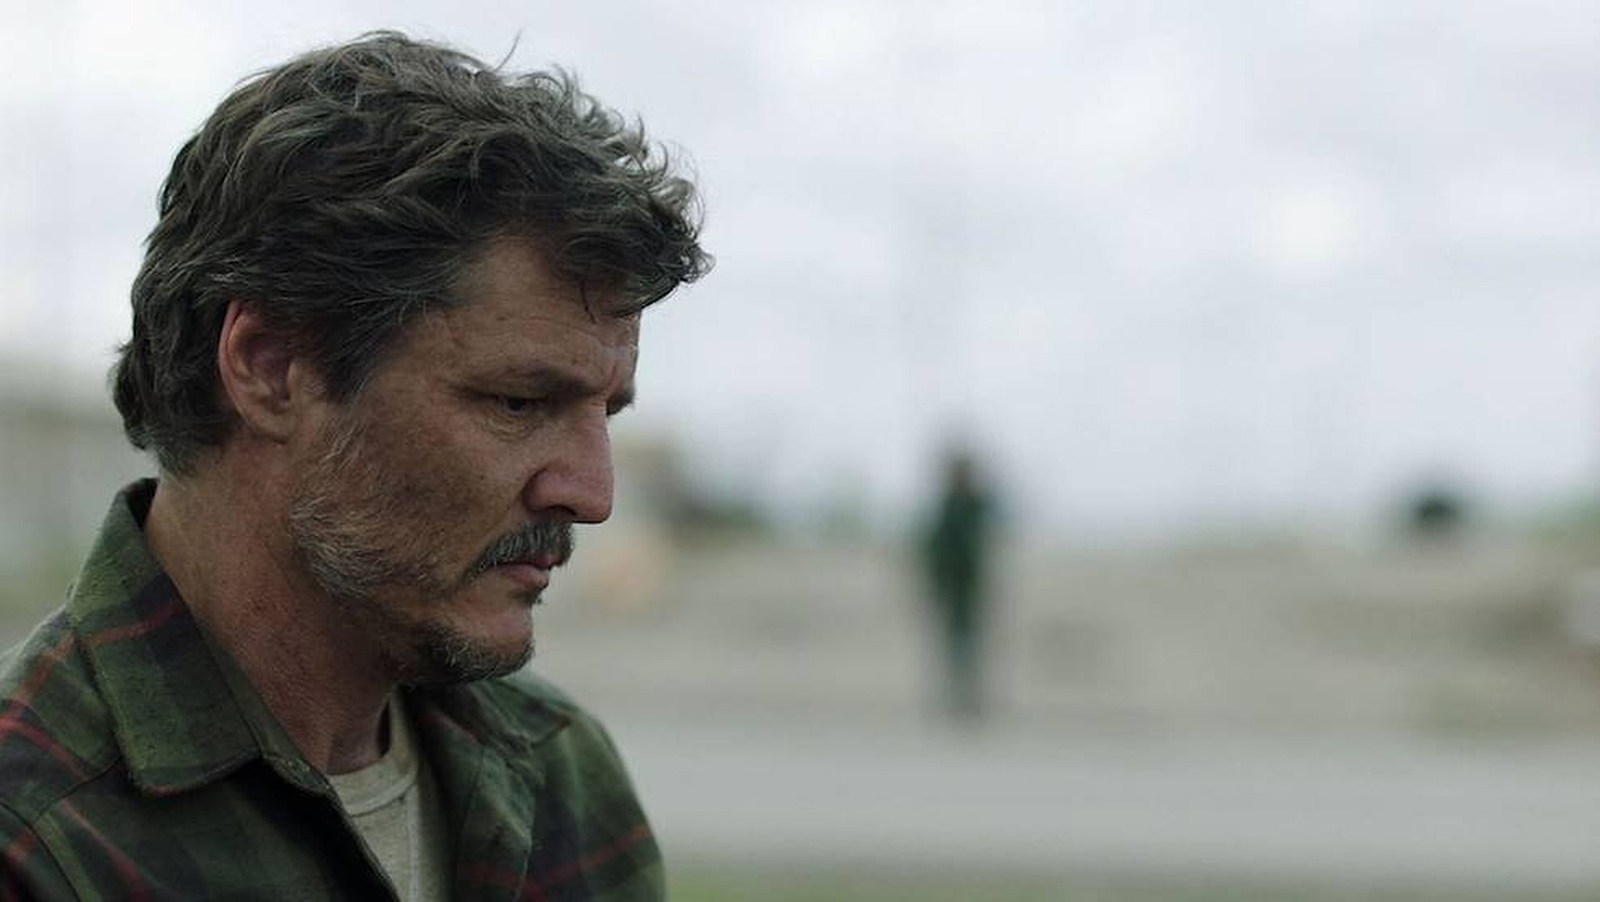 Pedro Pascal in a still from The Last of Us, also starring Bella Ramsey and created by Craig Mazin. Photo: HBO